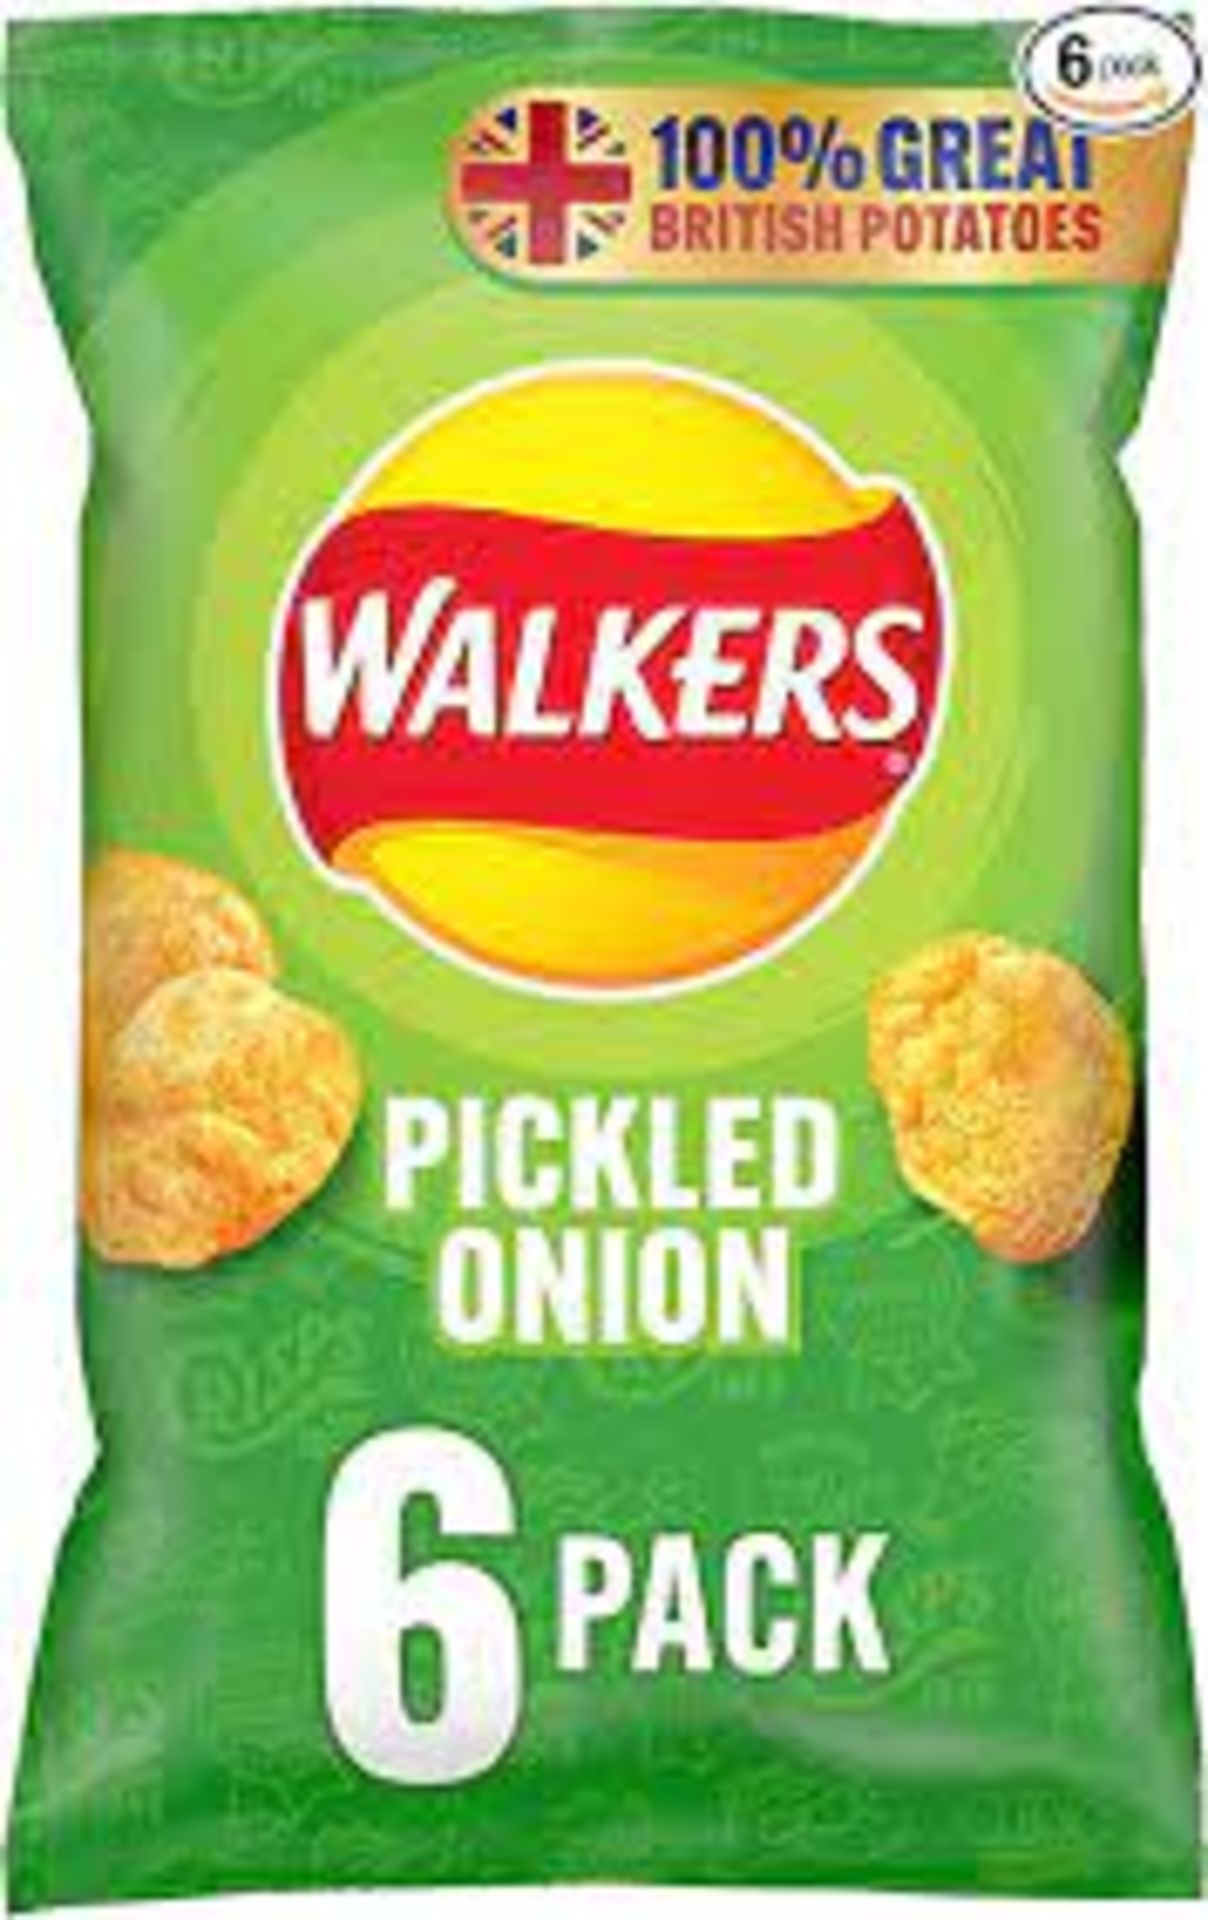 RRP £434 (Approx. Count 43) spW32m3803C (3) 11 x Walkers Pickled Onion Multipack Crisps, 6 x 25g 6 x